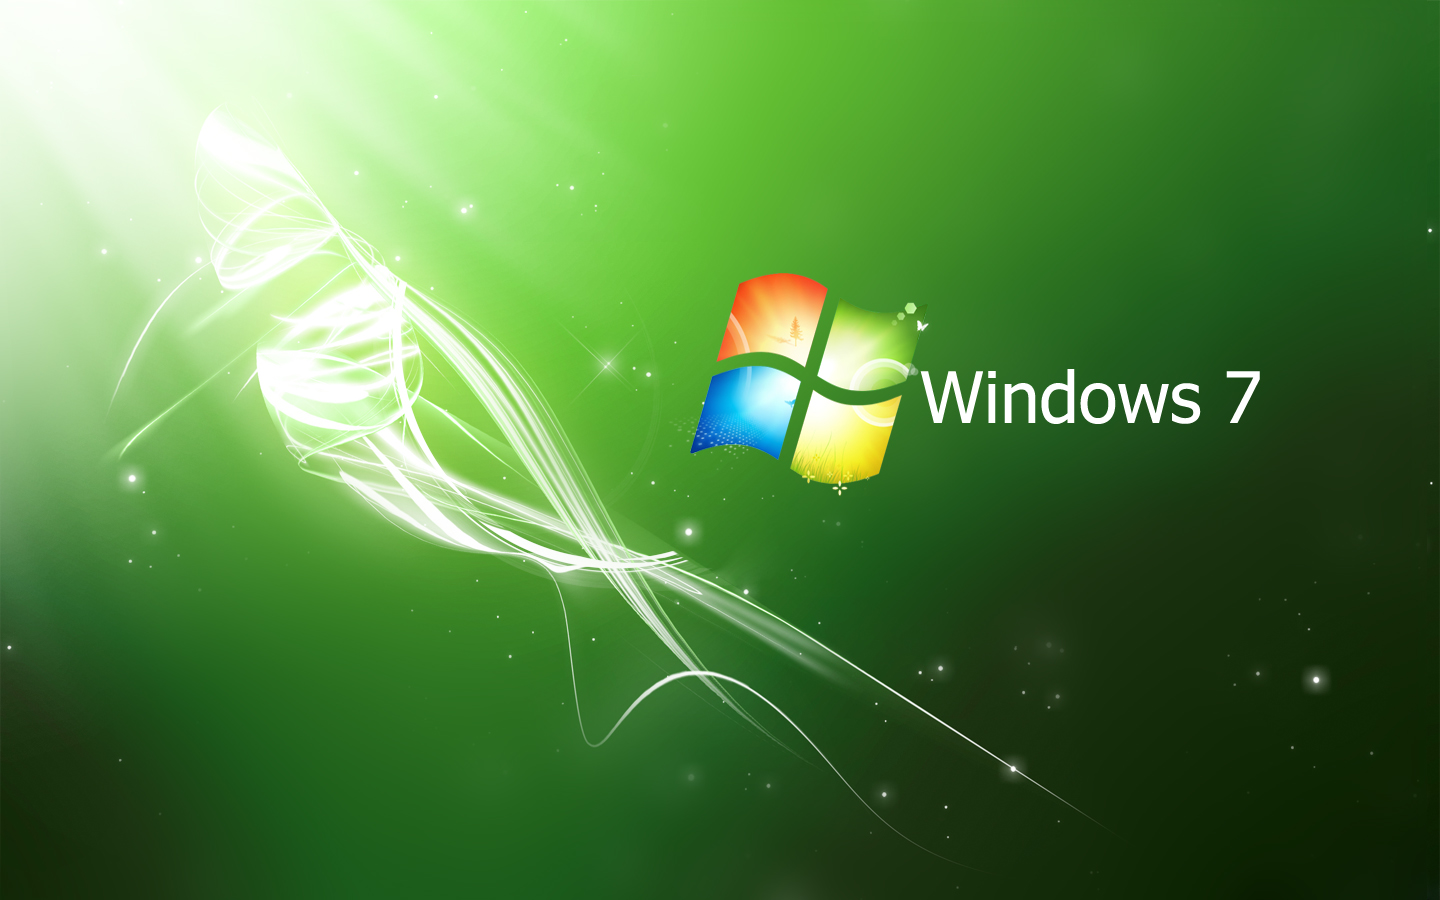 Windows Awesome Wallpaper